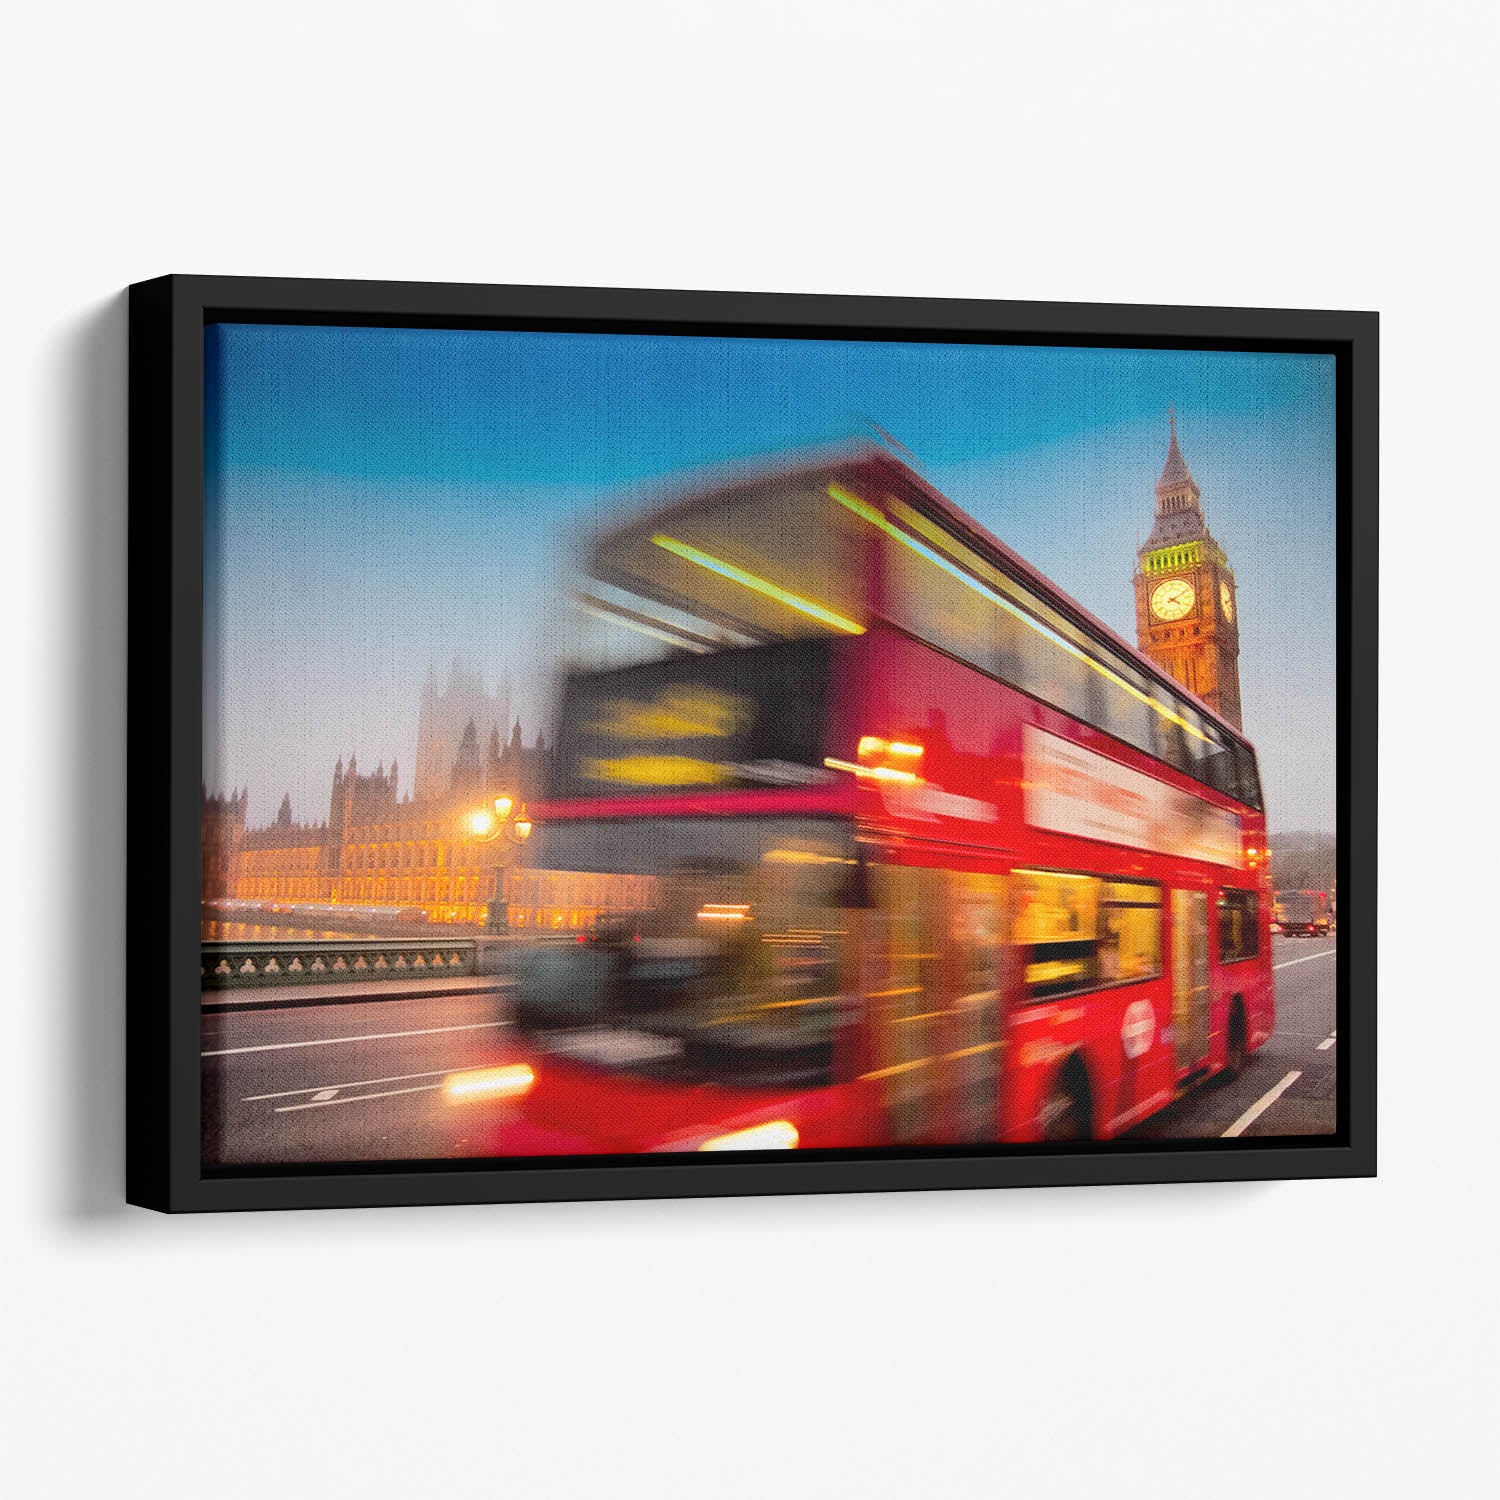 Houses Of Parliament red double-decker bus Floating Framed Canvas